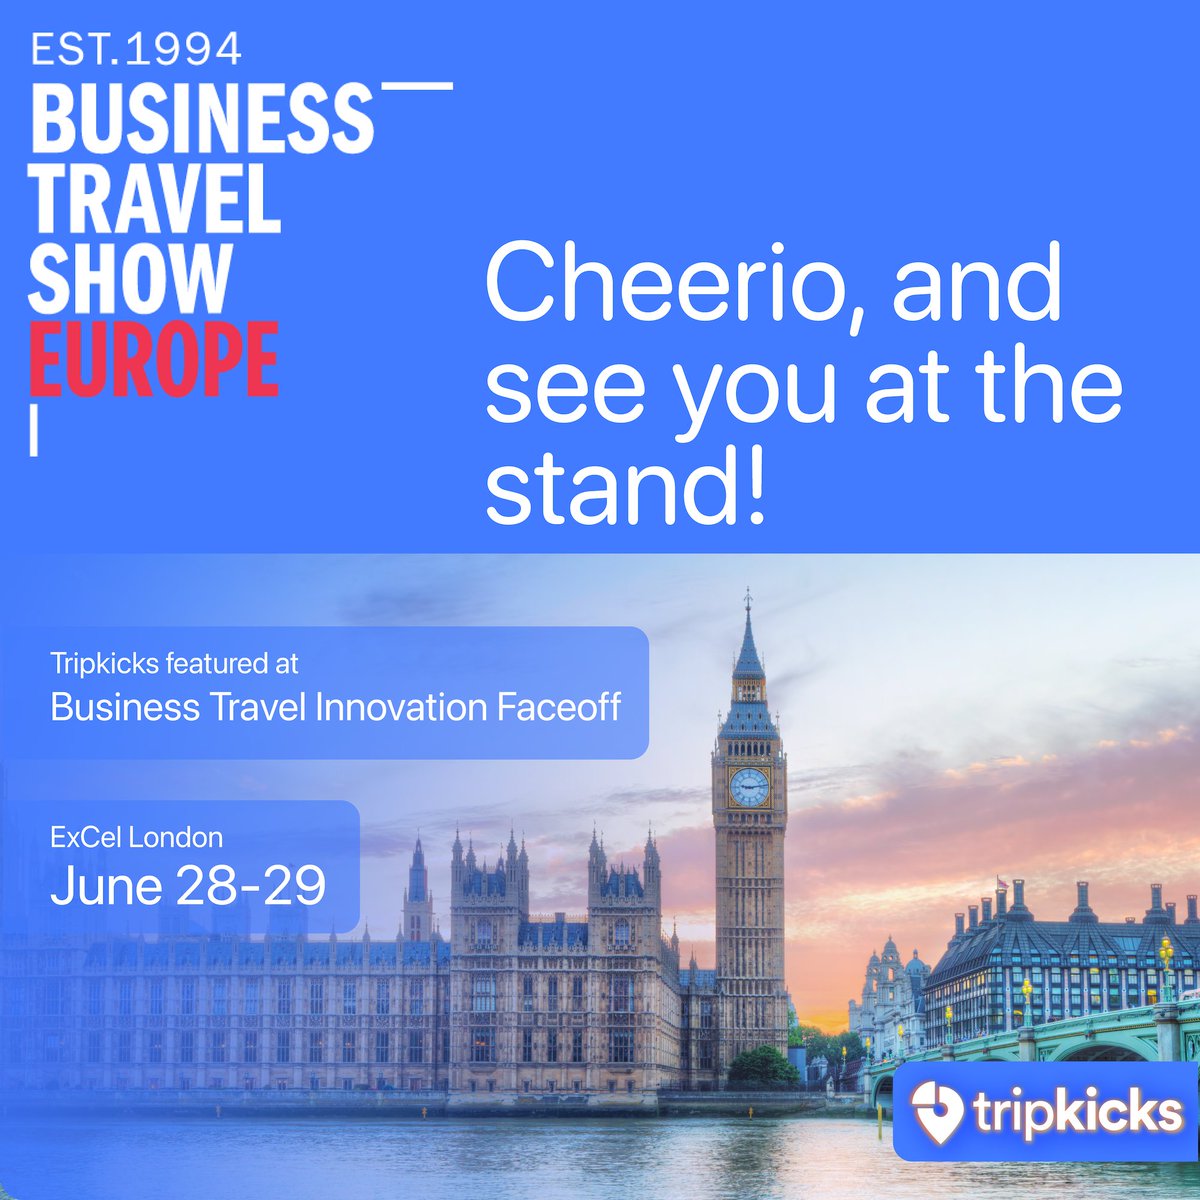 We're thrilled to be featured at Business Travel Innovation Faceoff!
🇬🇧 Let's connect at BTS Europe!
Learn where to find us, and setup a meeting.
hubs.ly/Q01Tkk2F0

Cheerio, and see you at the stand!
#BTShowEU #fortheloveoftravel @BTShowEU
#businesstravel #travel